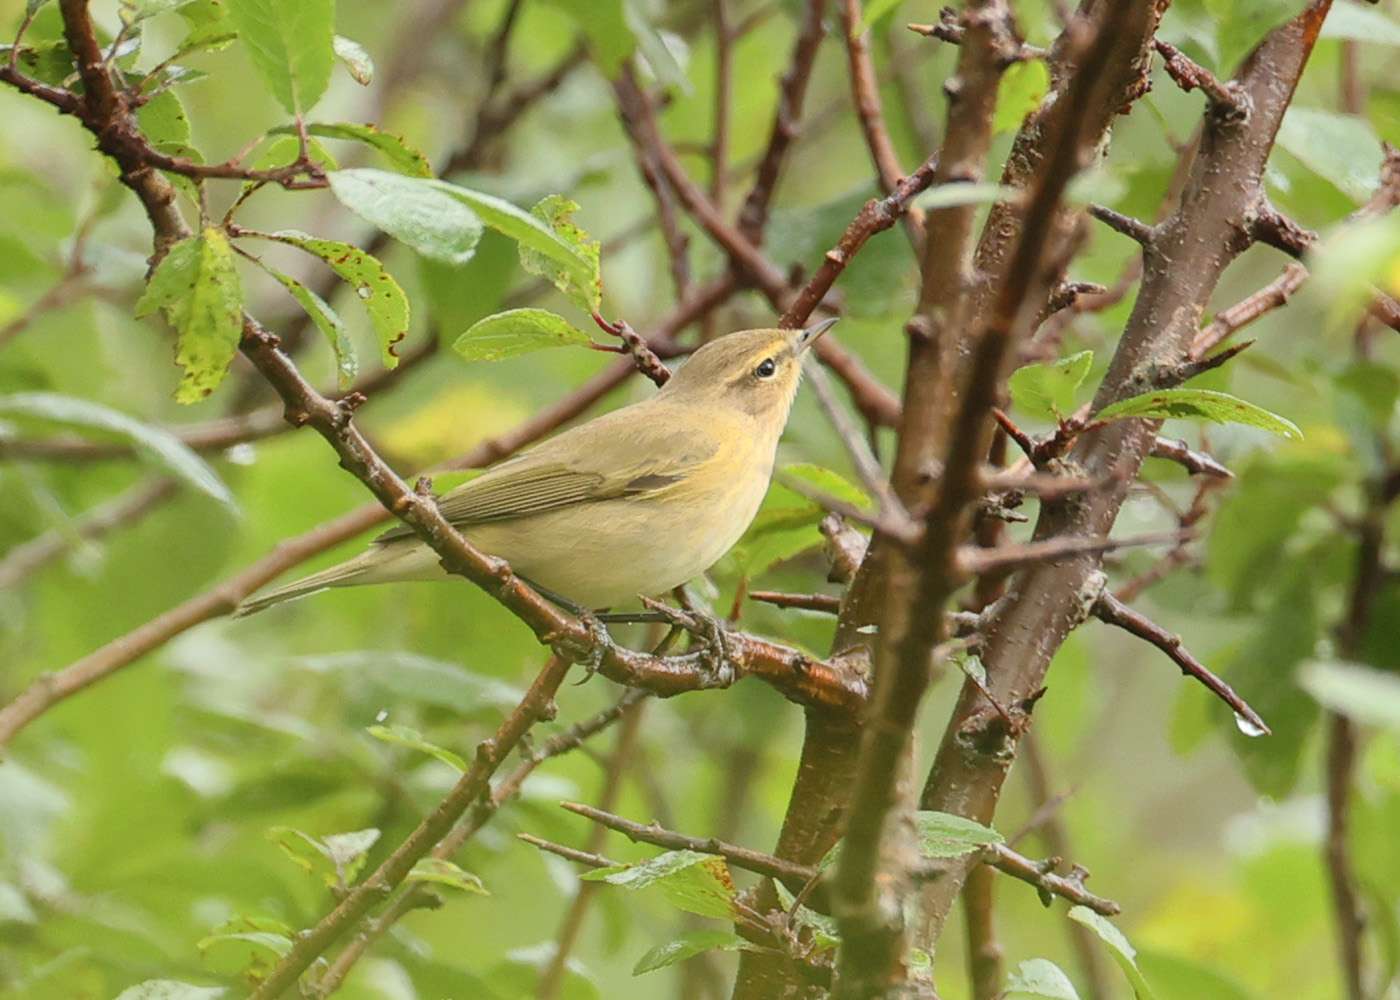 Chiffchaff by Steve Hopper at South Brent